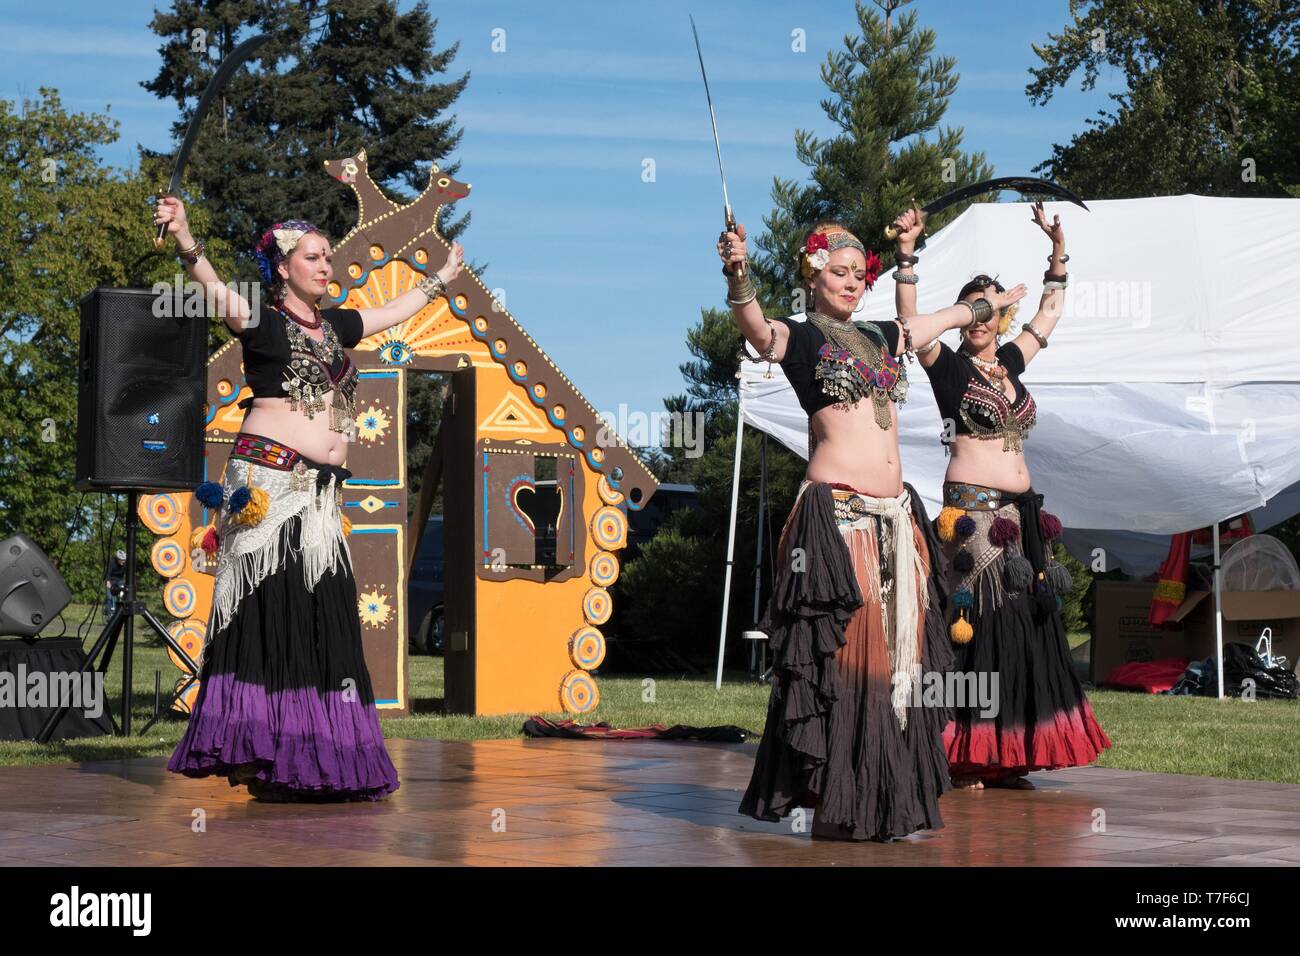 Belly dancers perform at the Maslenitsa Multicultural Festival in Eugene, Oregon, USA. Stock Photo